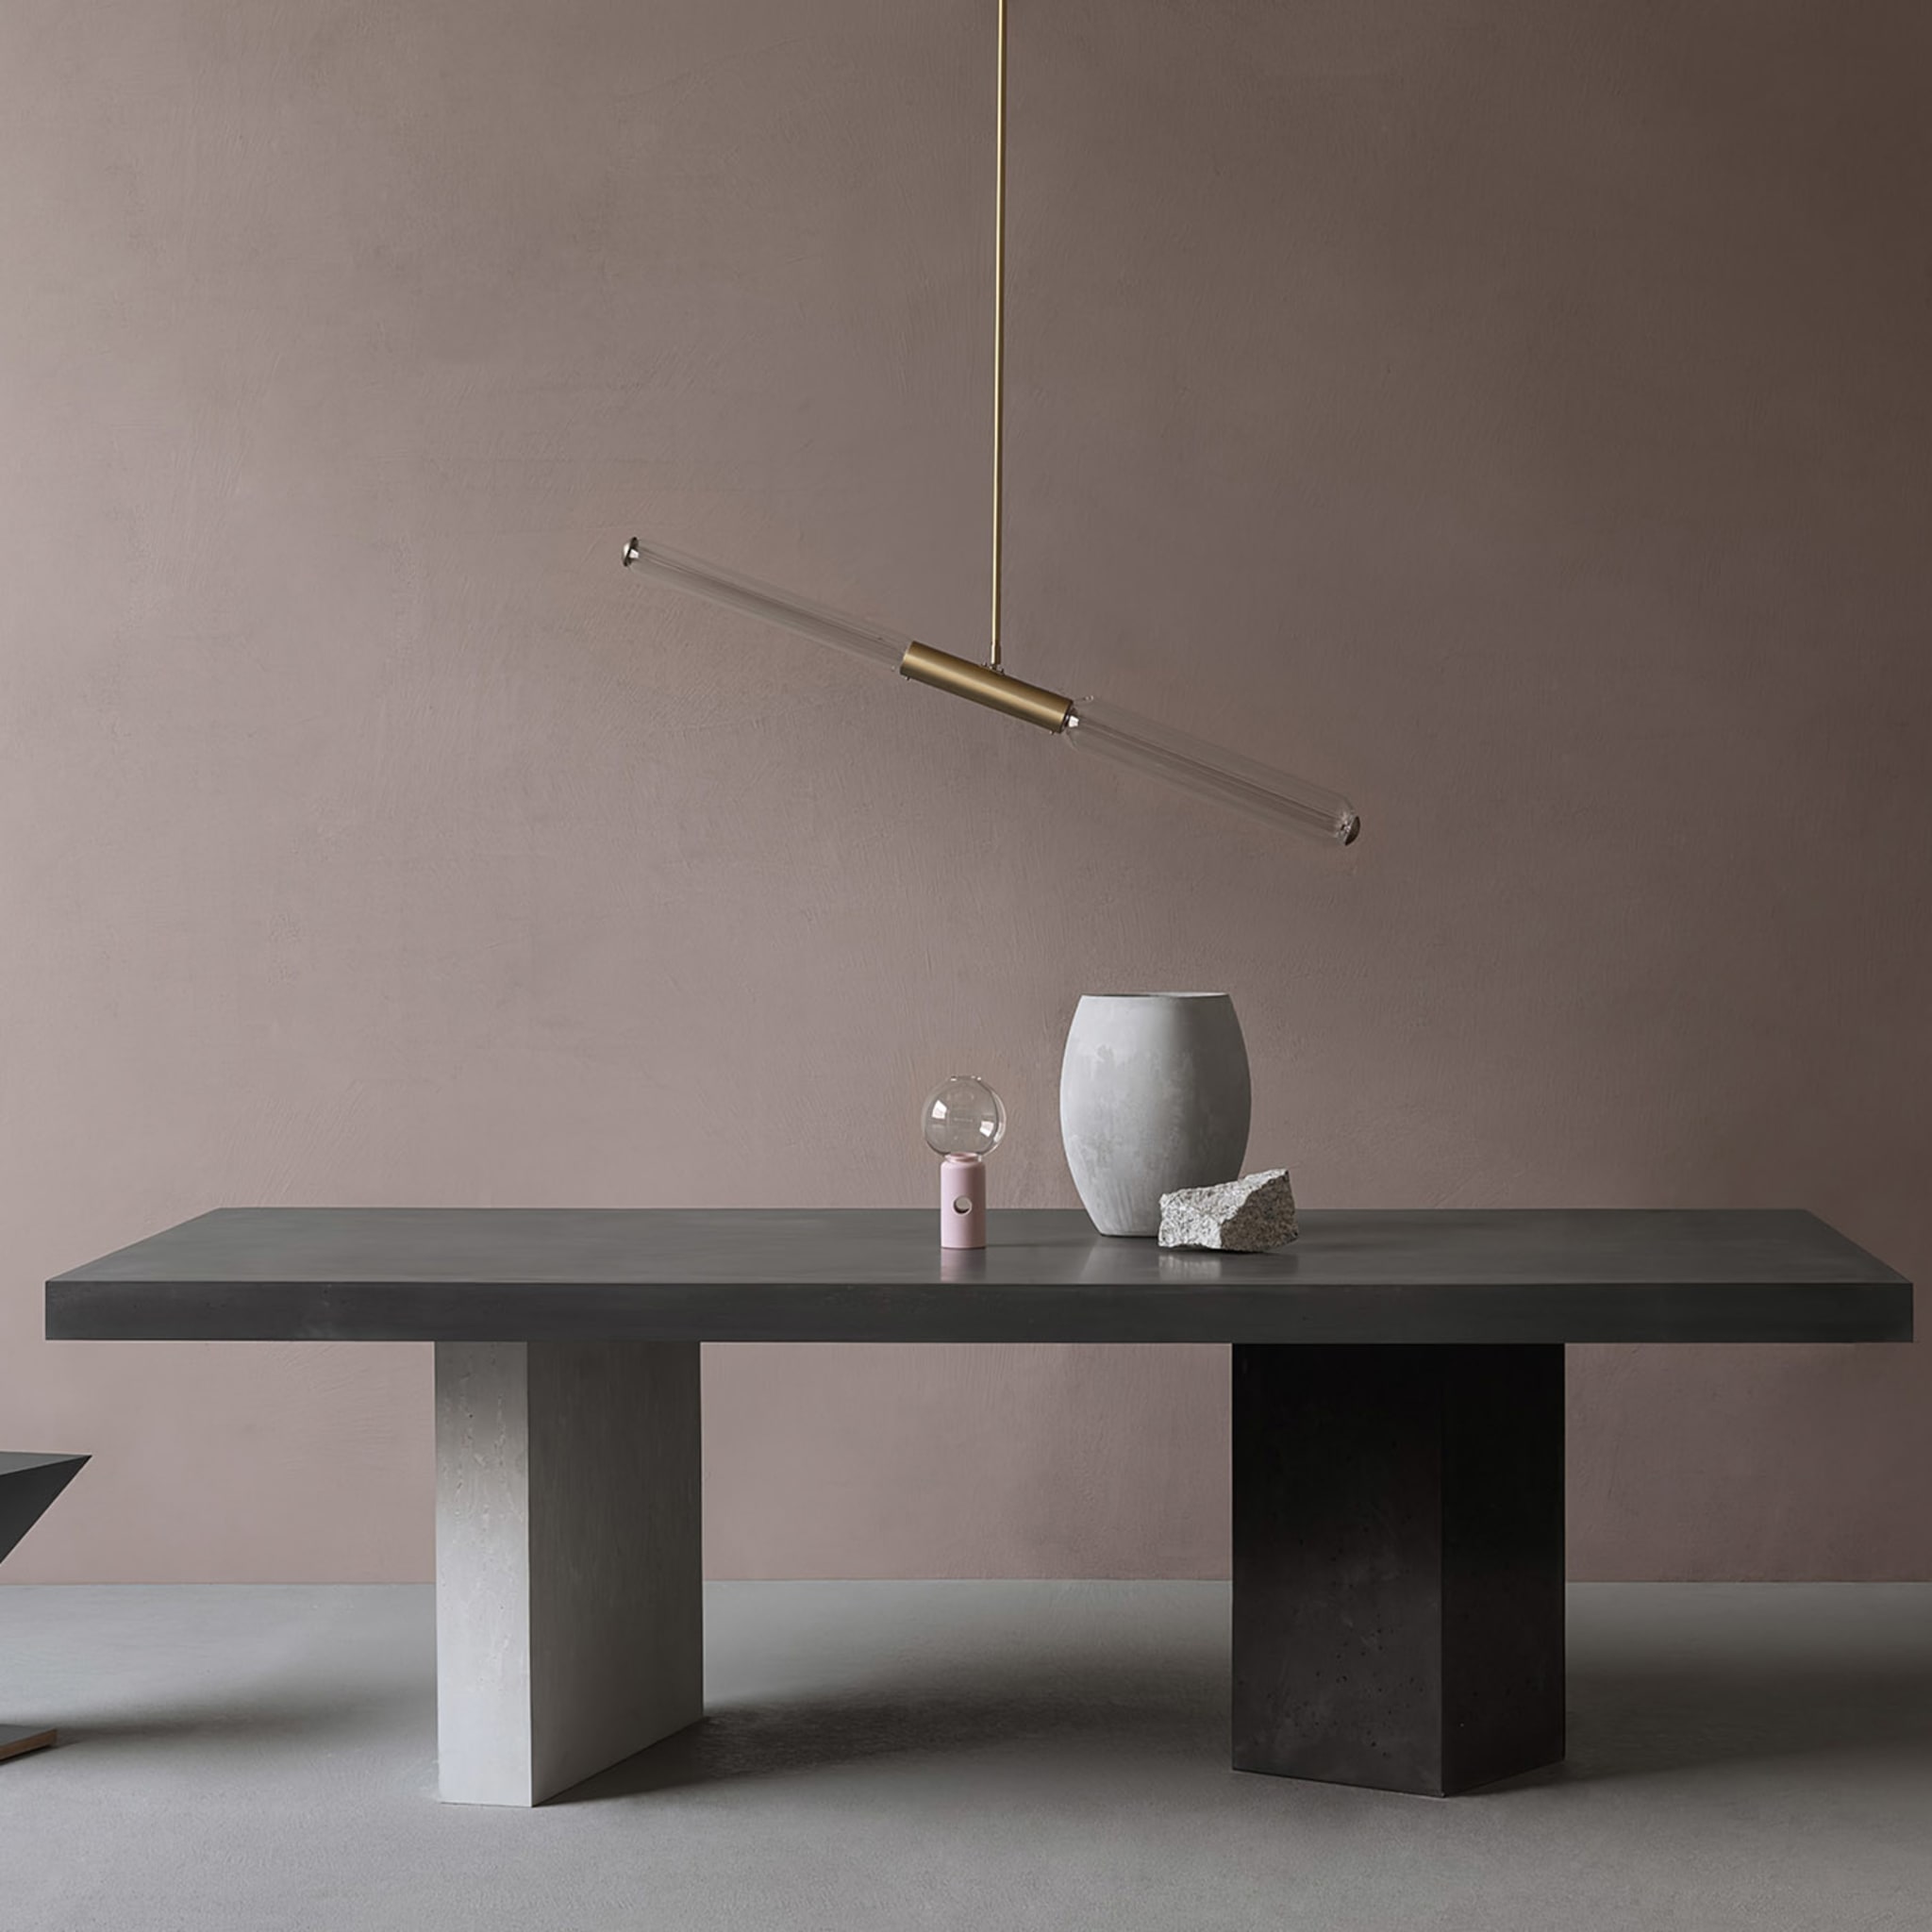 Euclide Dining Table - Alternative view 1